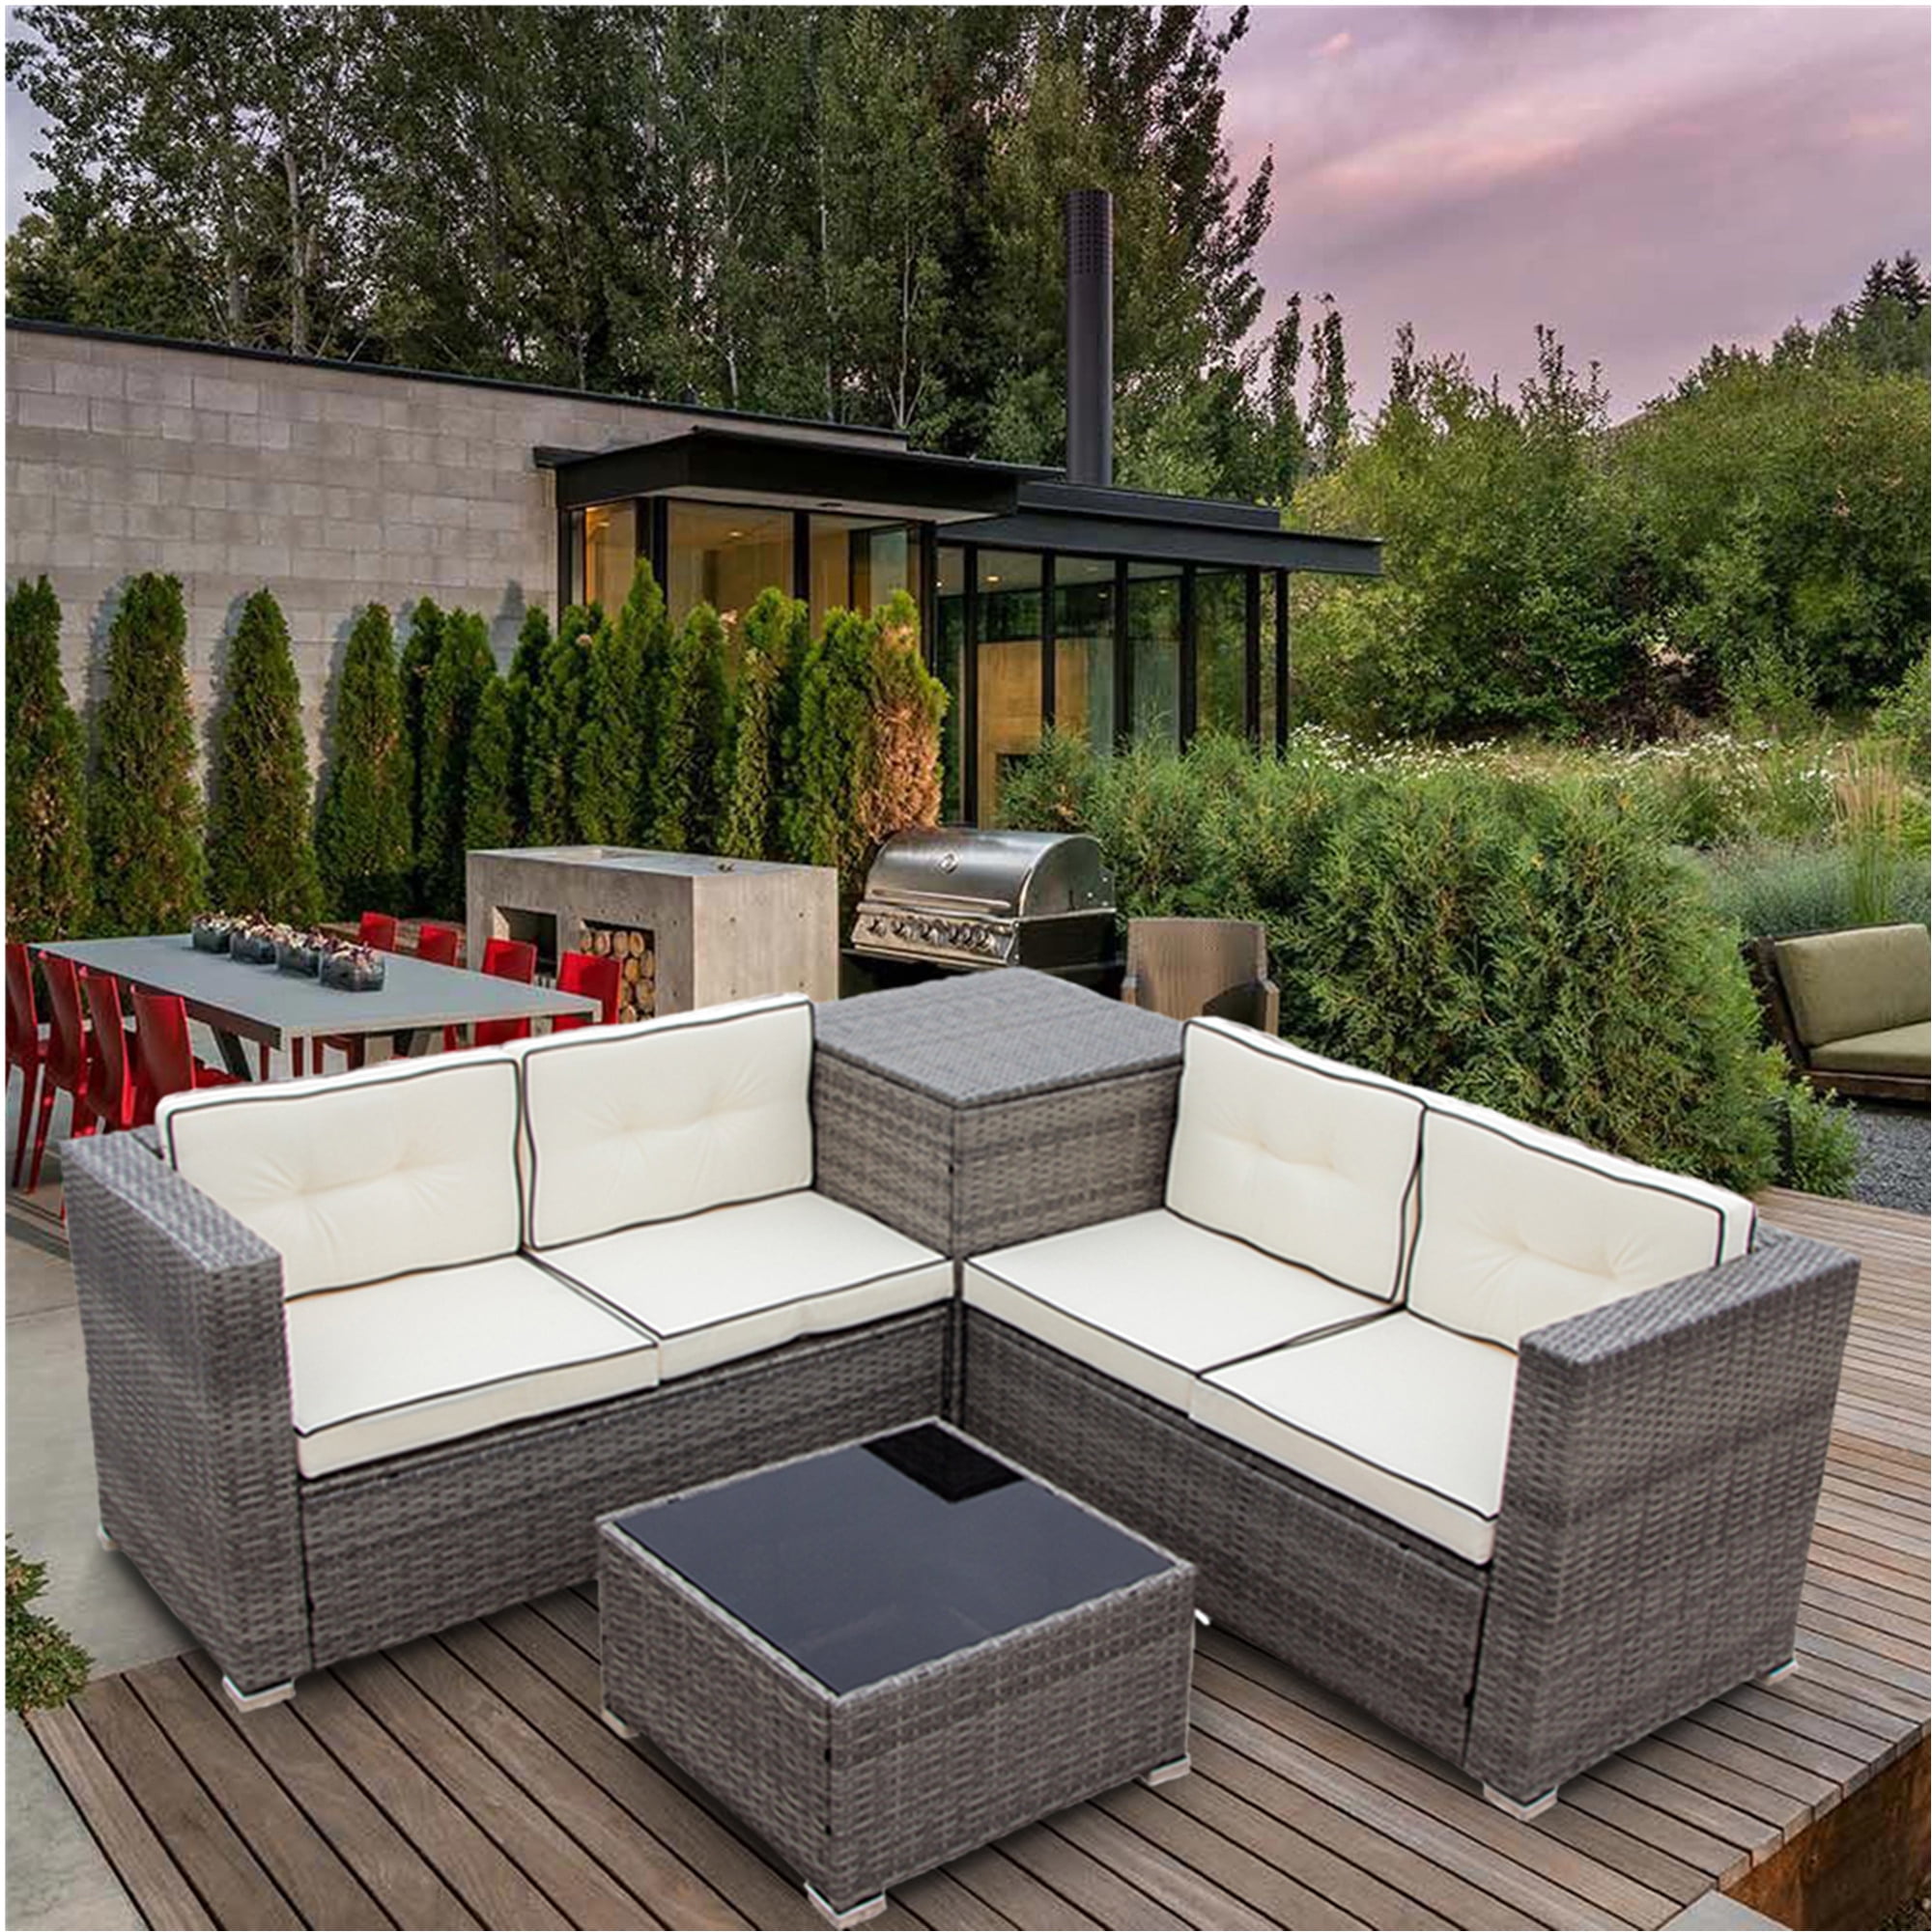 Enyopro 4 Piece Patio Furniture Set All Weather Outdoor Sectional Sofa